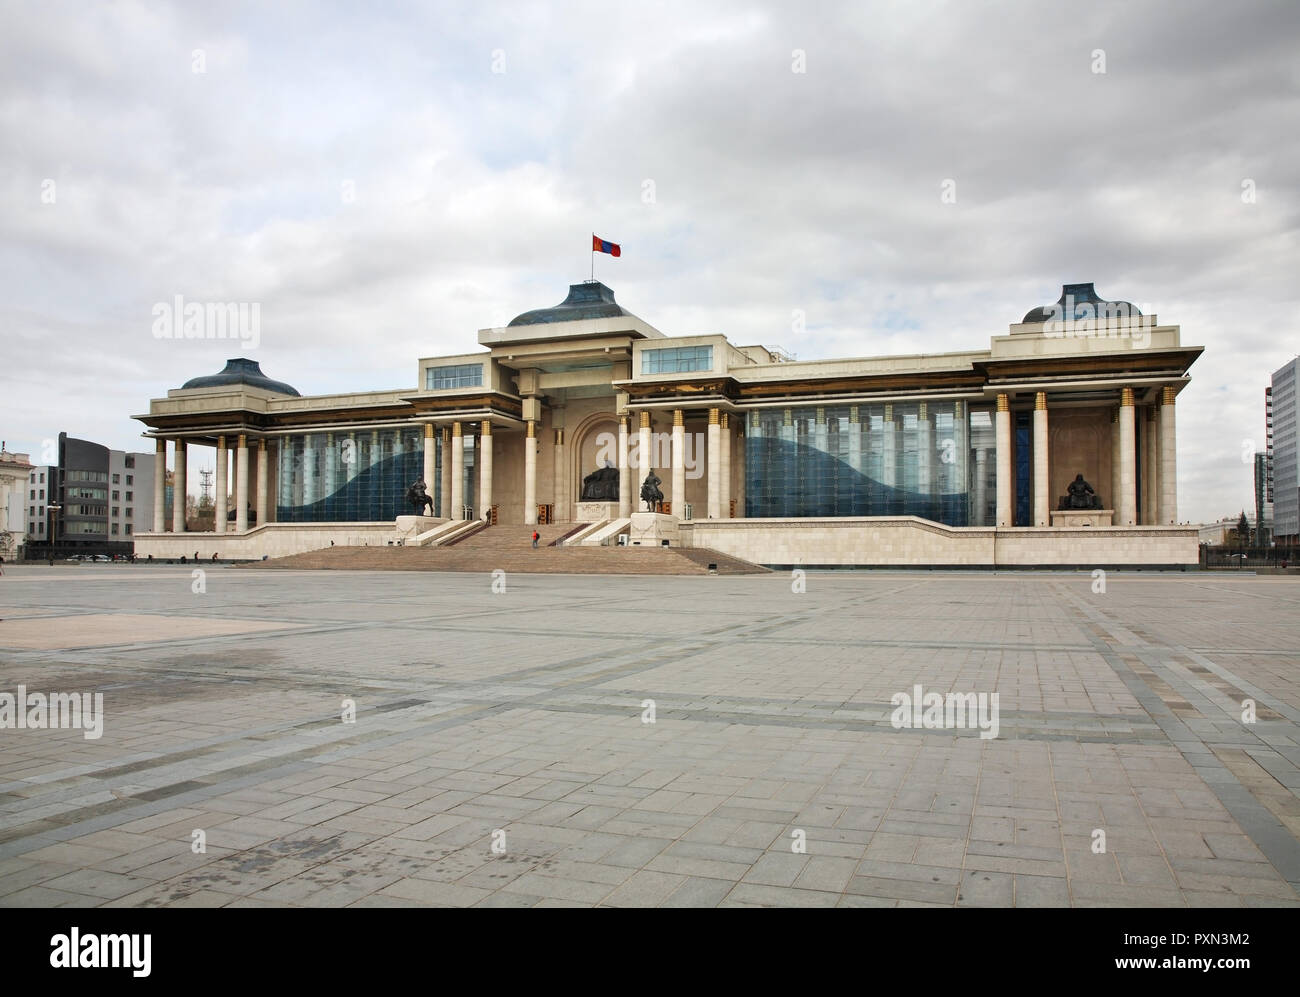 Government Palace on Grand Chinggis Khaan square in Ulaanbaatar. Mongolia Stock Photo